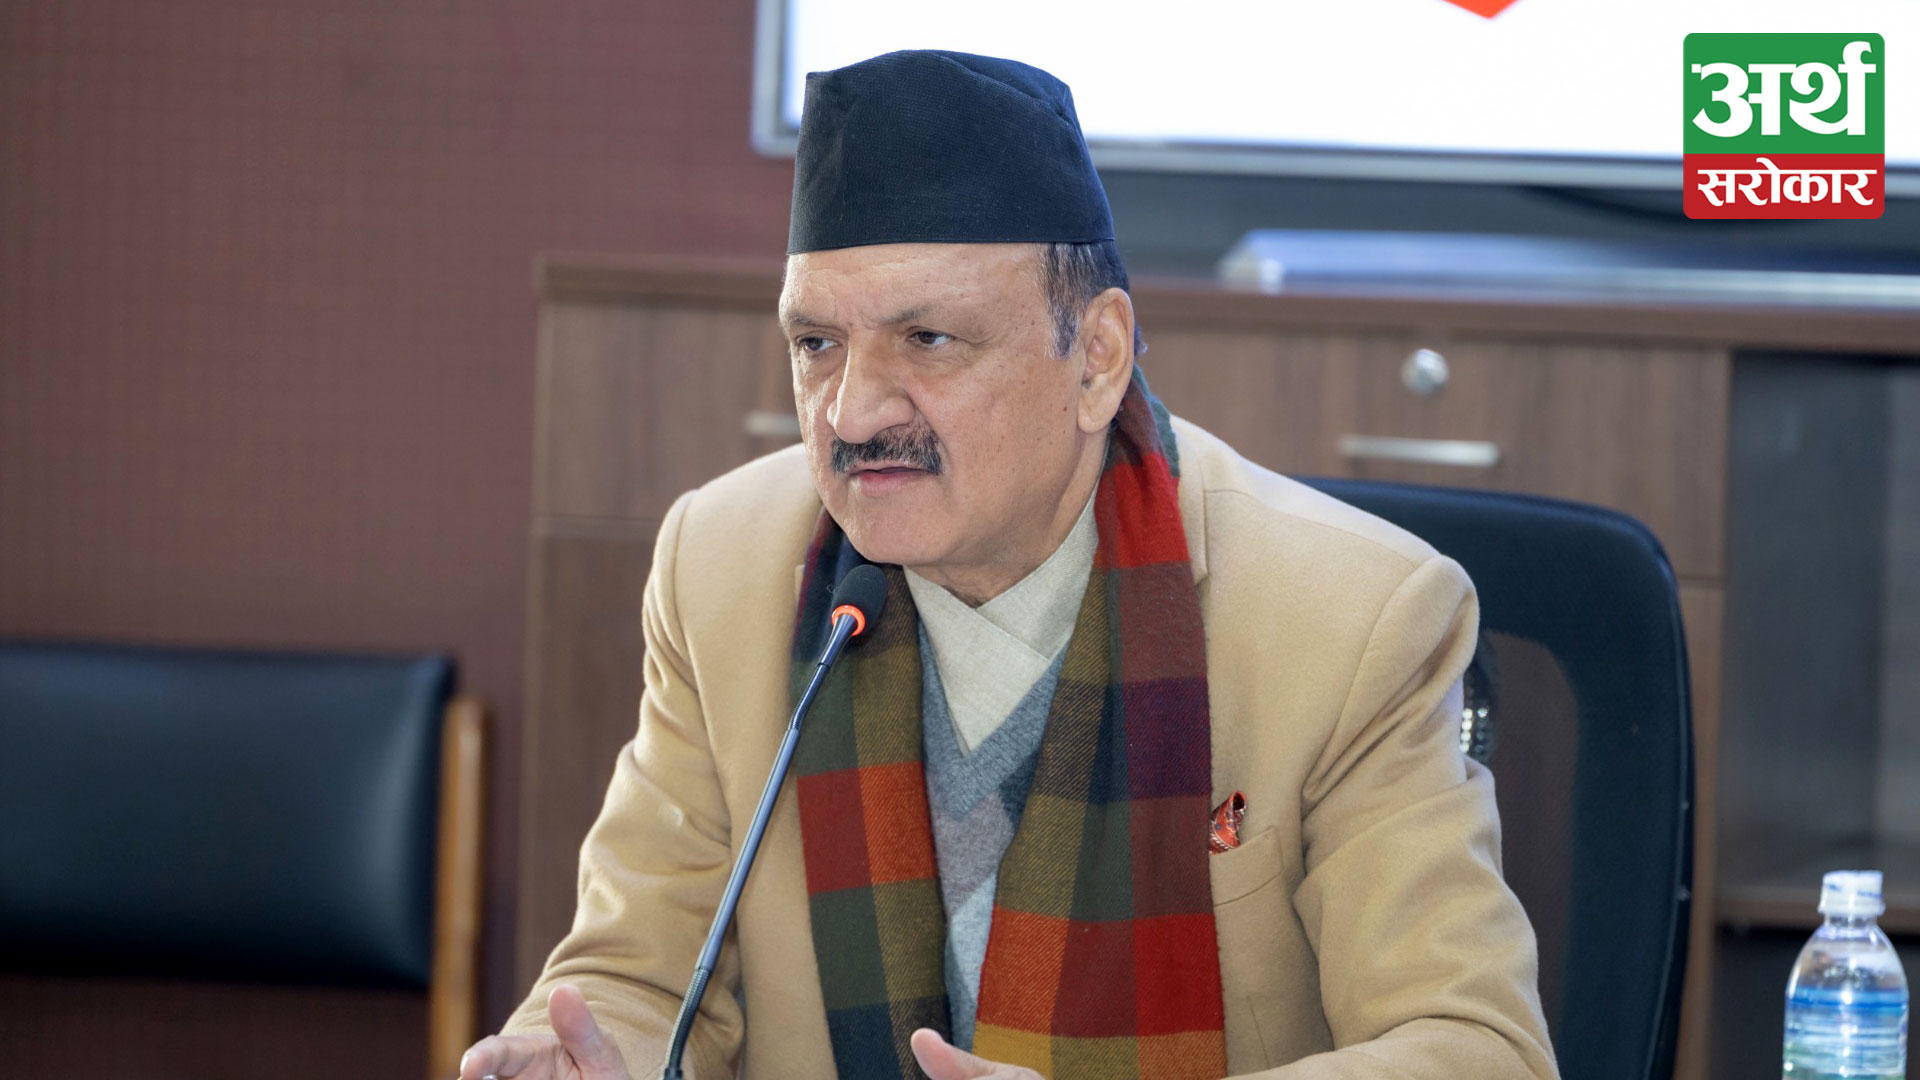 International investors have shown curiosity to invest in Nepal-Finance Minister